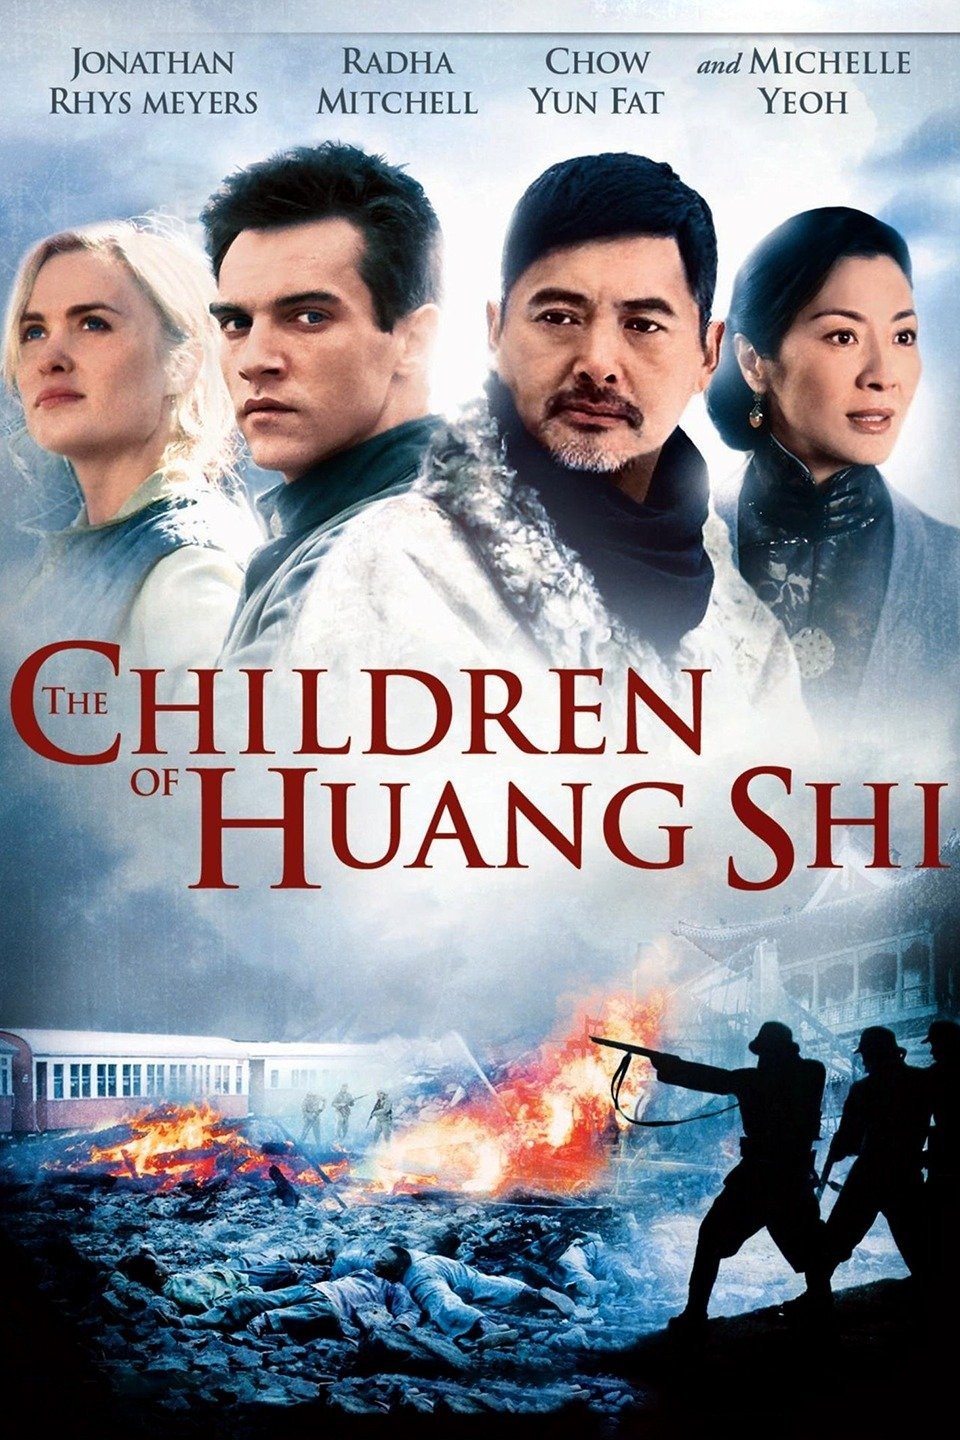 The Children of Huang